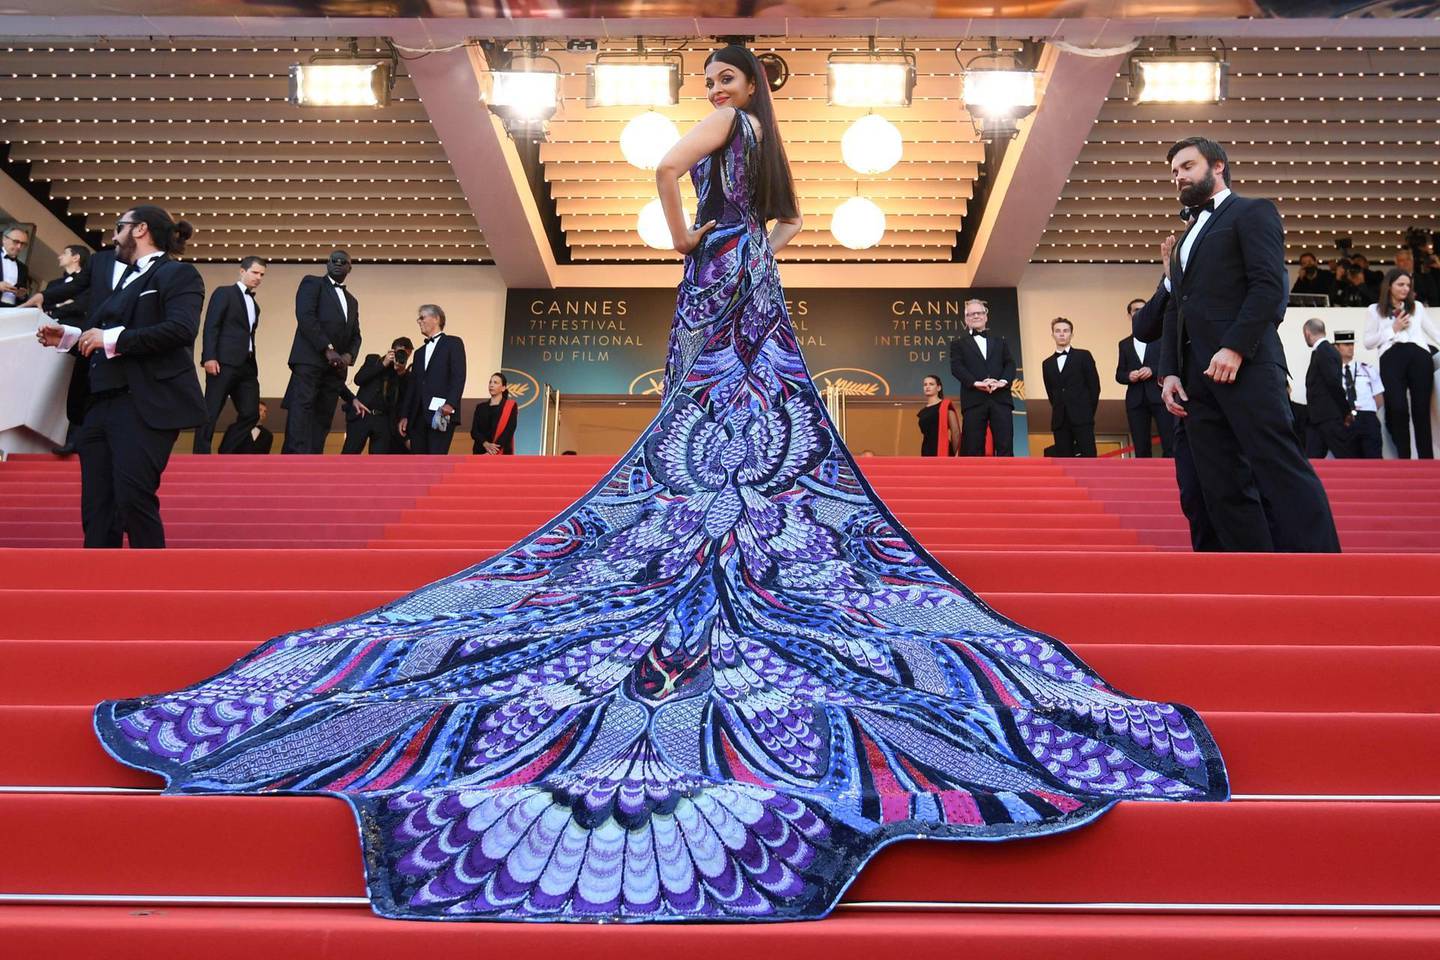 Aishwarya Rai Bachchan in the butterfly-inspired dress by Cinco at the 2018 Cannes Film Festival. AFP